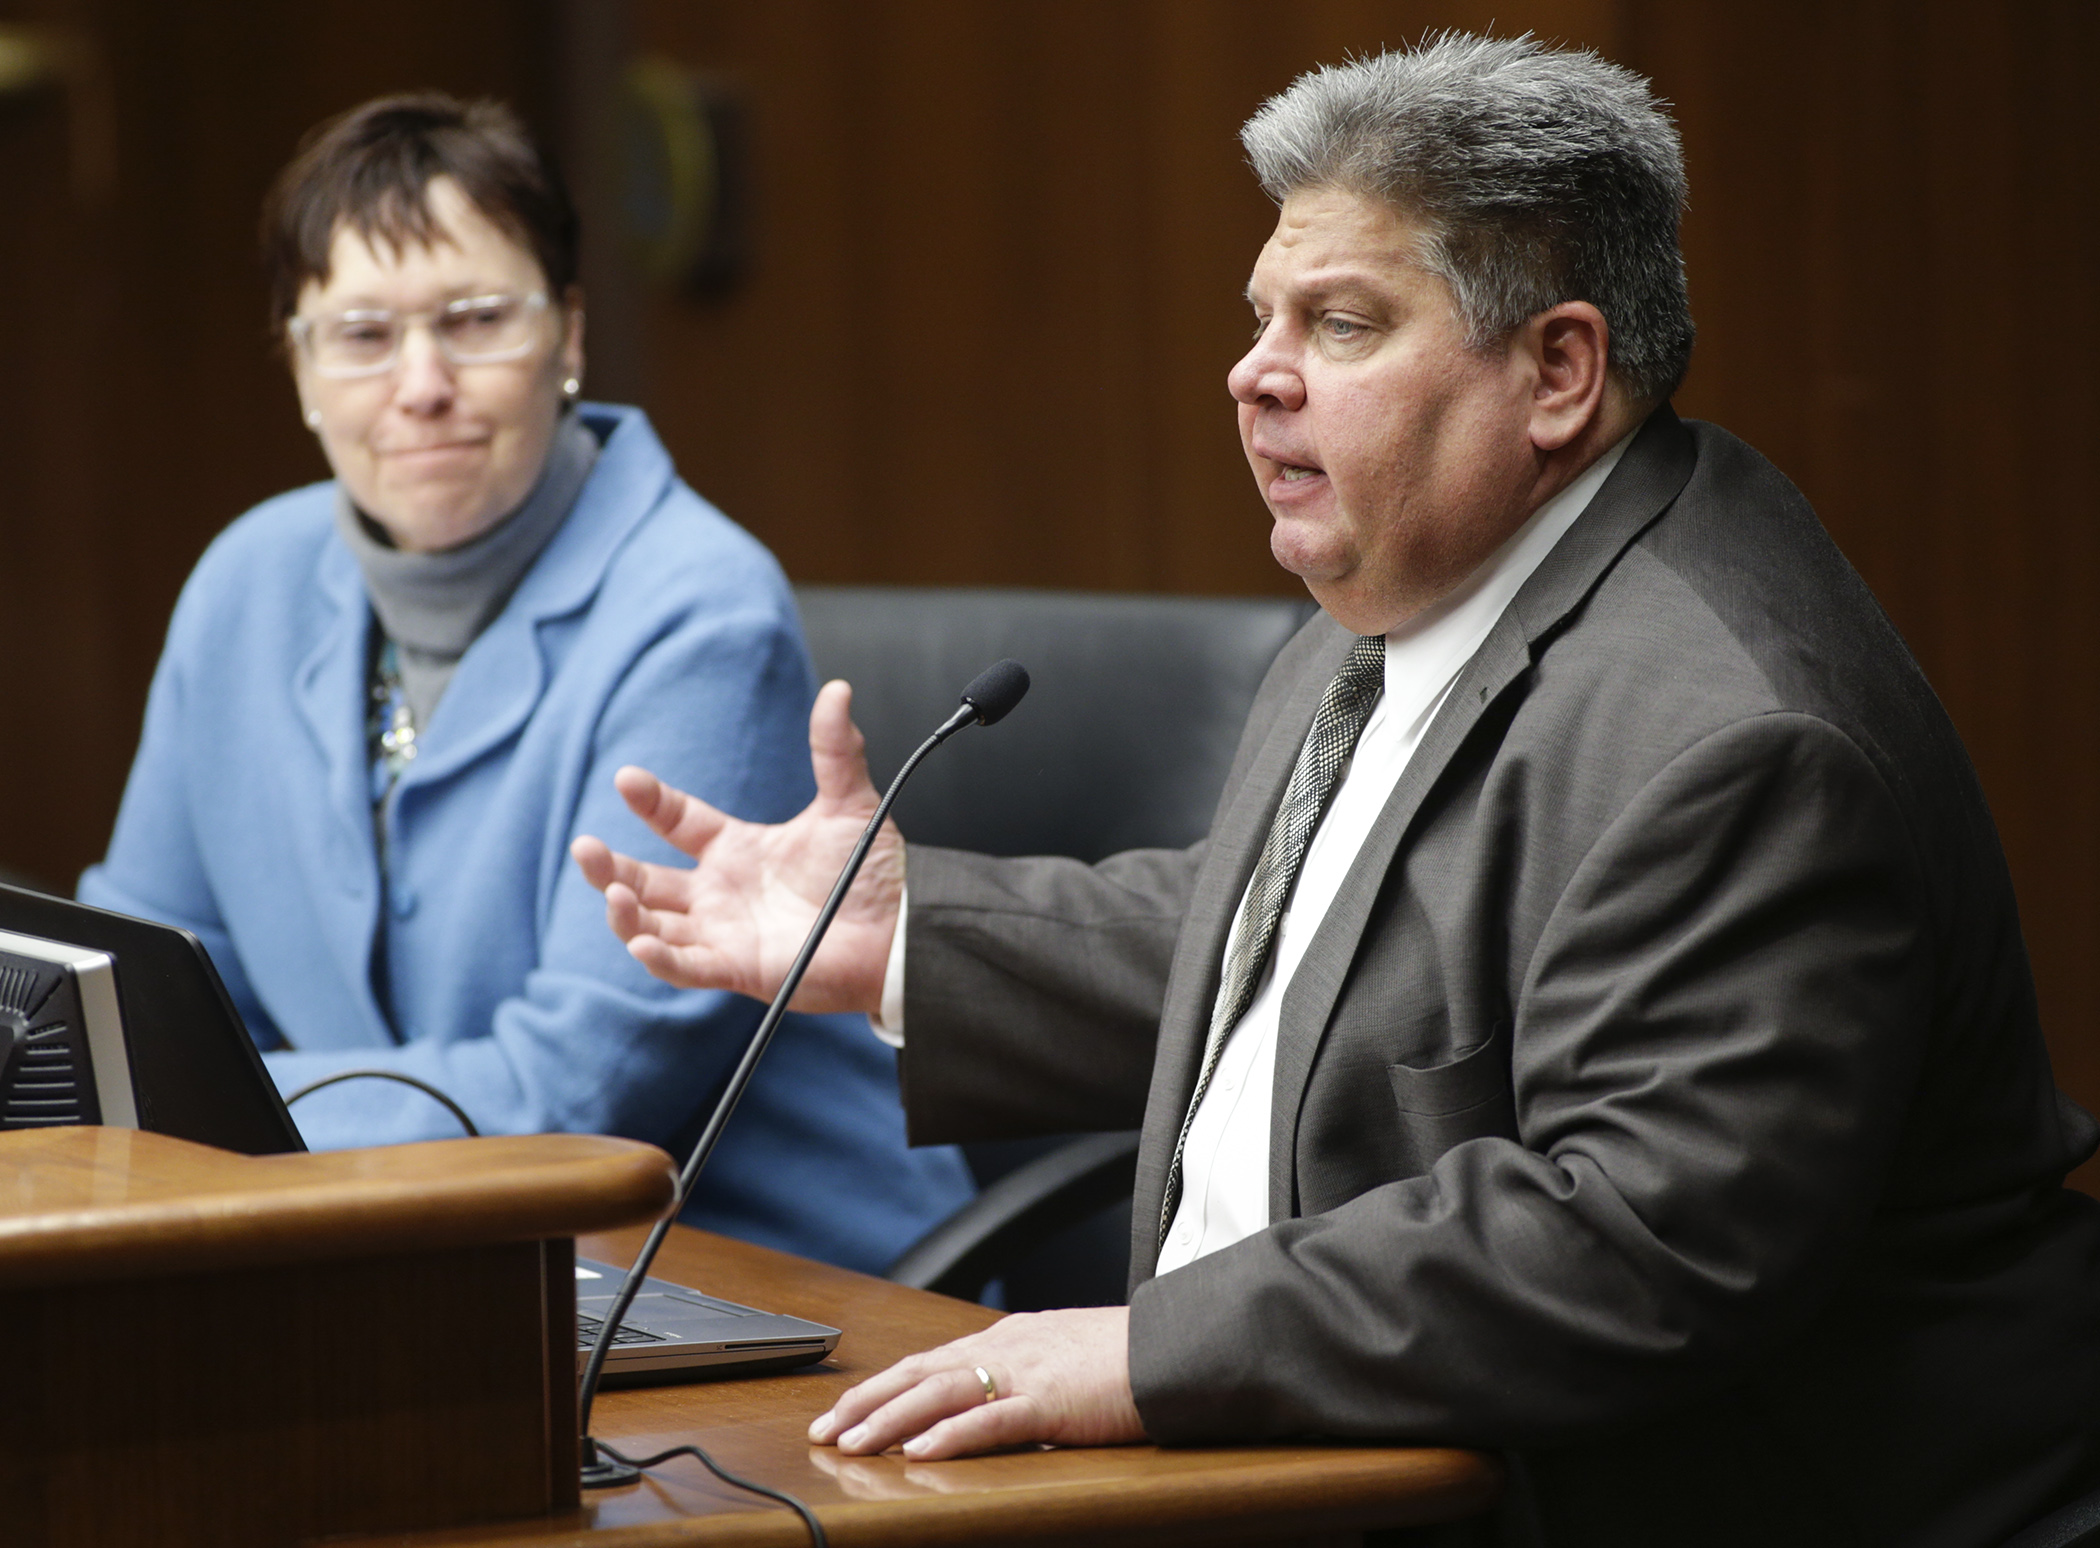 Minnesota Farm Bureau President Kevin Paap testifies March 3 on HF3699, sponsored by Rep. Jeanne Poppe, left. The bill would increase the minimum biofuel content in gasoline to 15 percent. Photo by Paul Battaglia